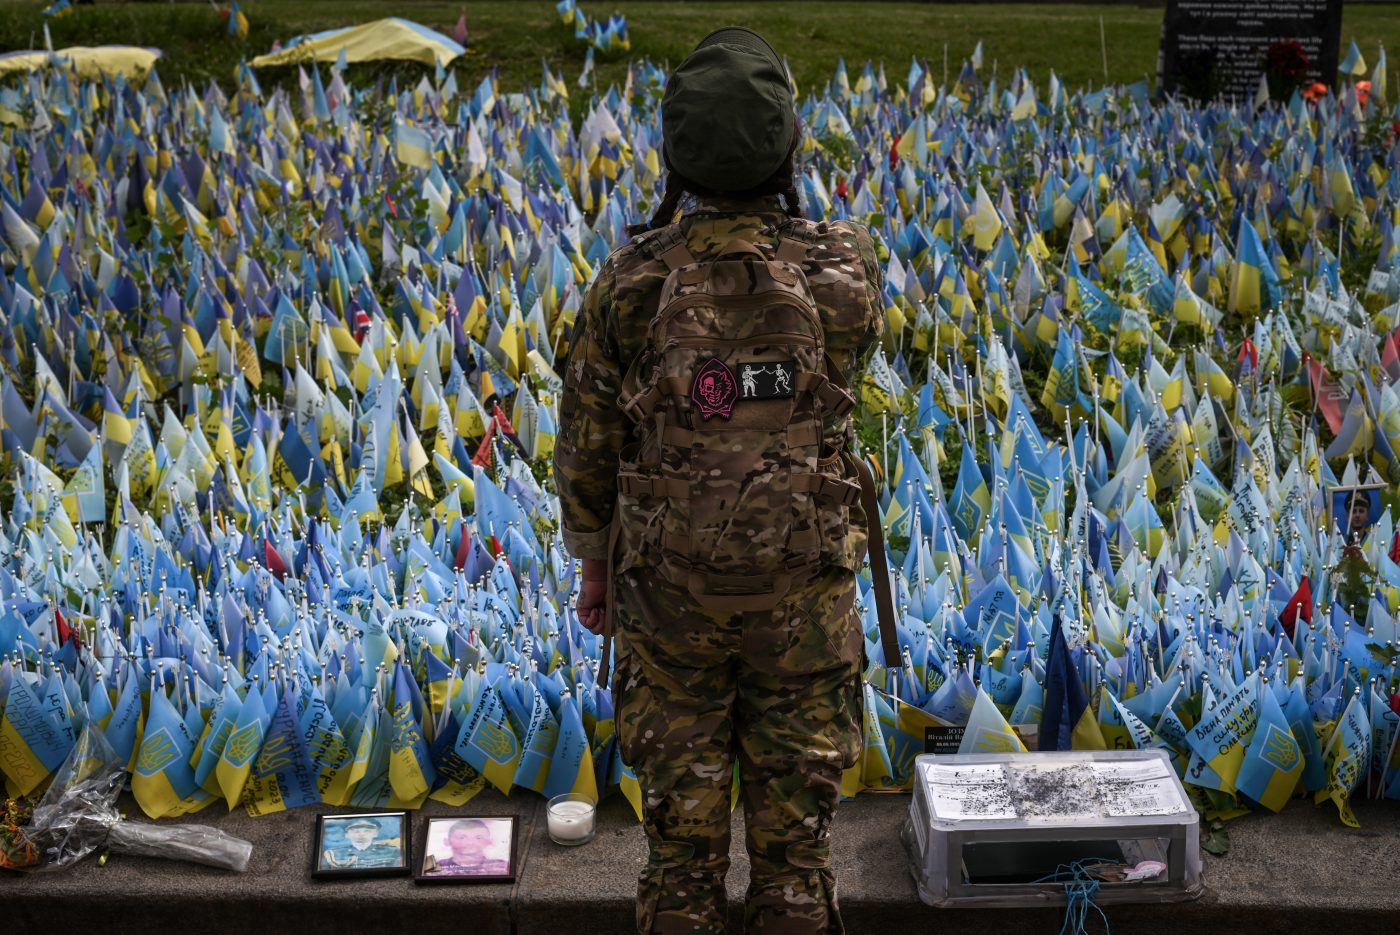 Photo: A Ukrainian service member pays her respects to fallen comrades in front of a memorial dedicated to Ukrainian Servicemembers killed in combat, in the city center of Kyiv on August 24, 2023. Ukrainians gather to celebrate Ukraine's Independence Day at a display of destroyed Russian military vehicles and captured Russian military equipment on the historic Khreschatyk Street in the city center of Kyiv. Credit: Photo by Justin Yau/ Sipa USA